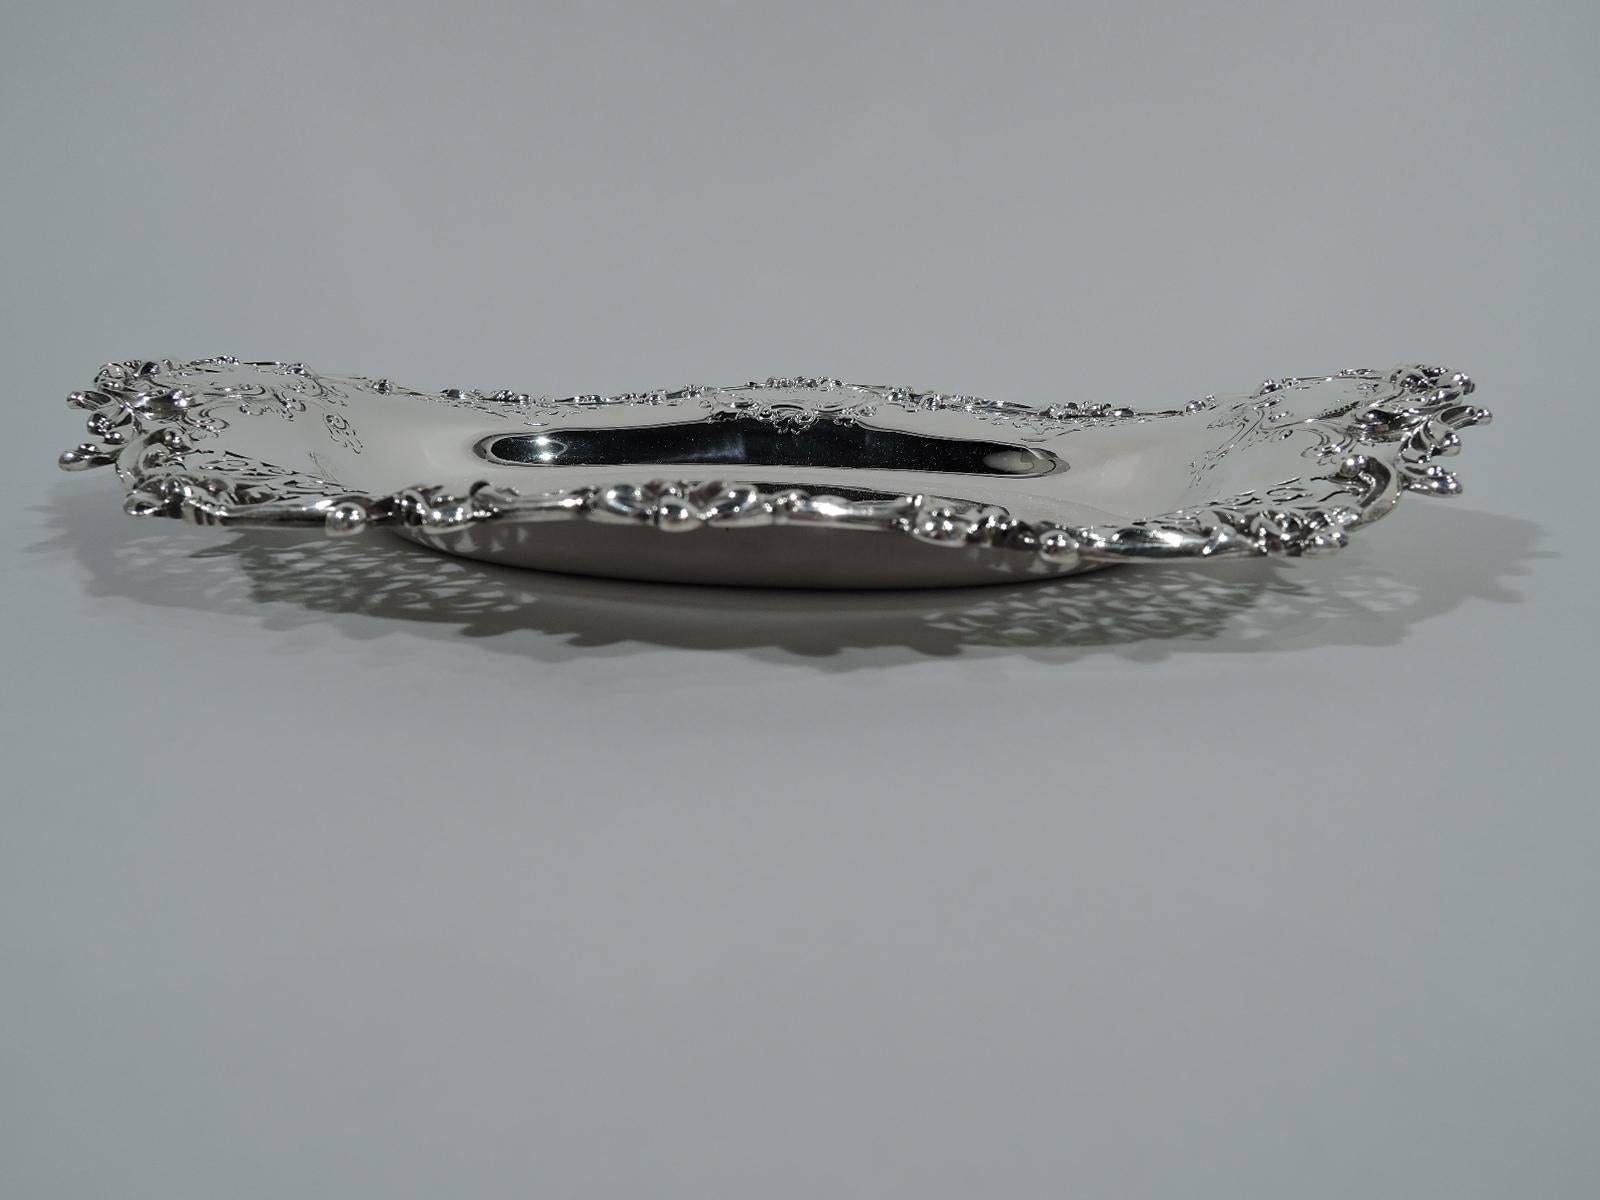 Fancy sterling silver serving dish. Made by Howard & Co. in New York in 1892. Oval well and wavy scrolled rim chased and applied scrolls and flowers and pierced scrollwork. Scrolled frames (vacant). Hallmark includes year. Heavy weight: 18.6 troy